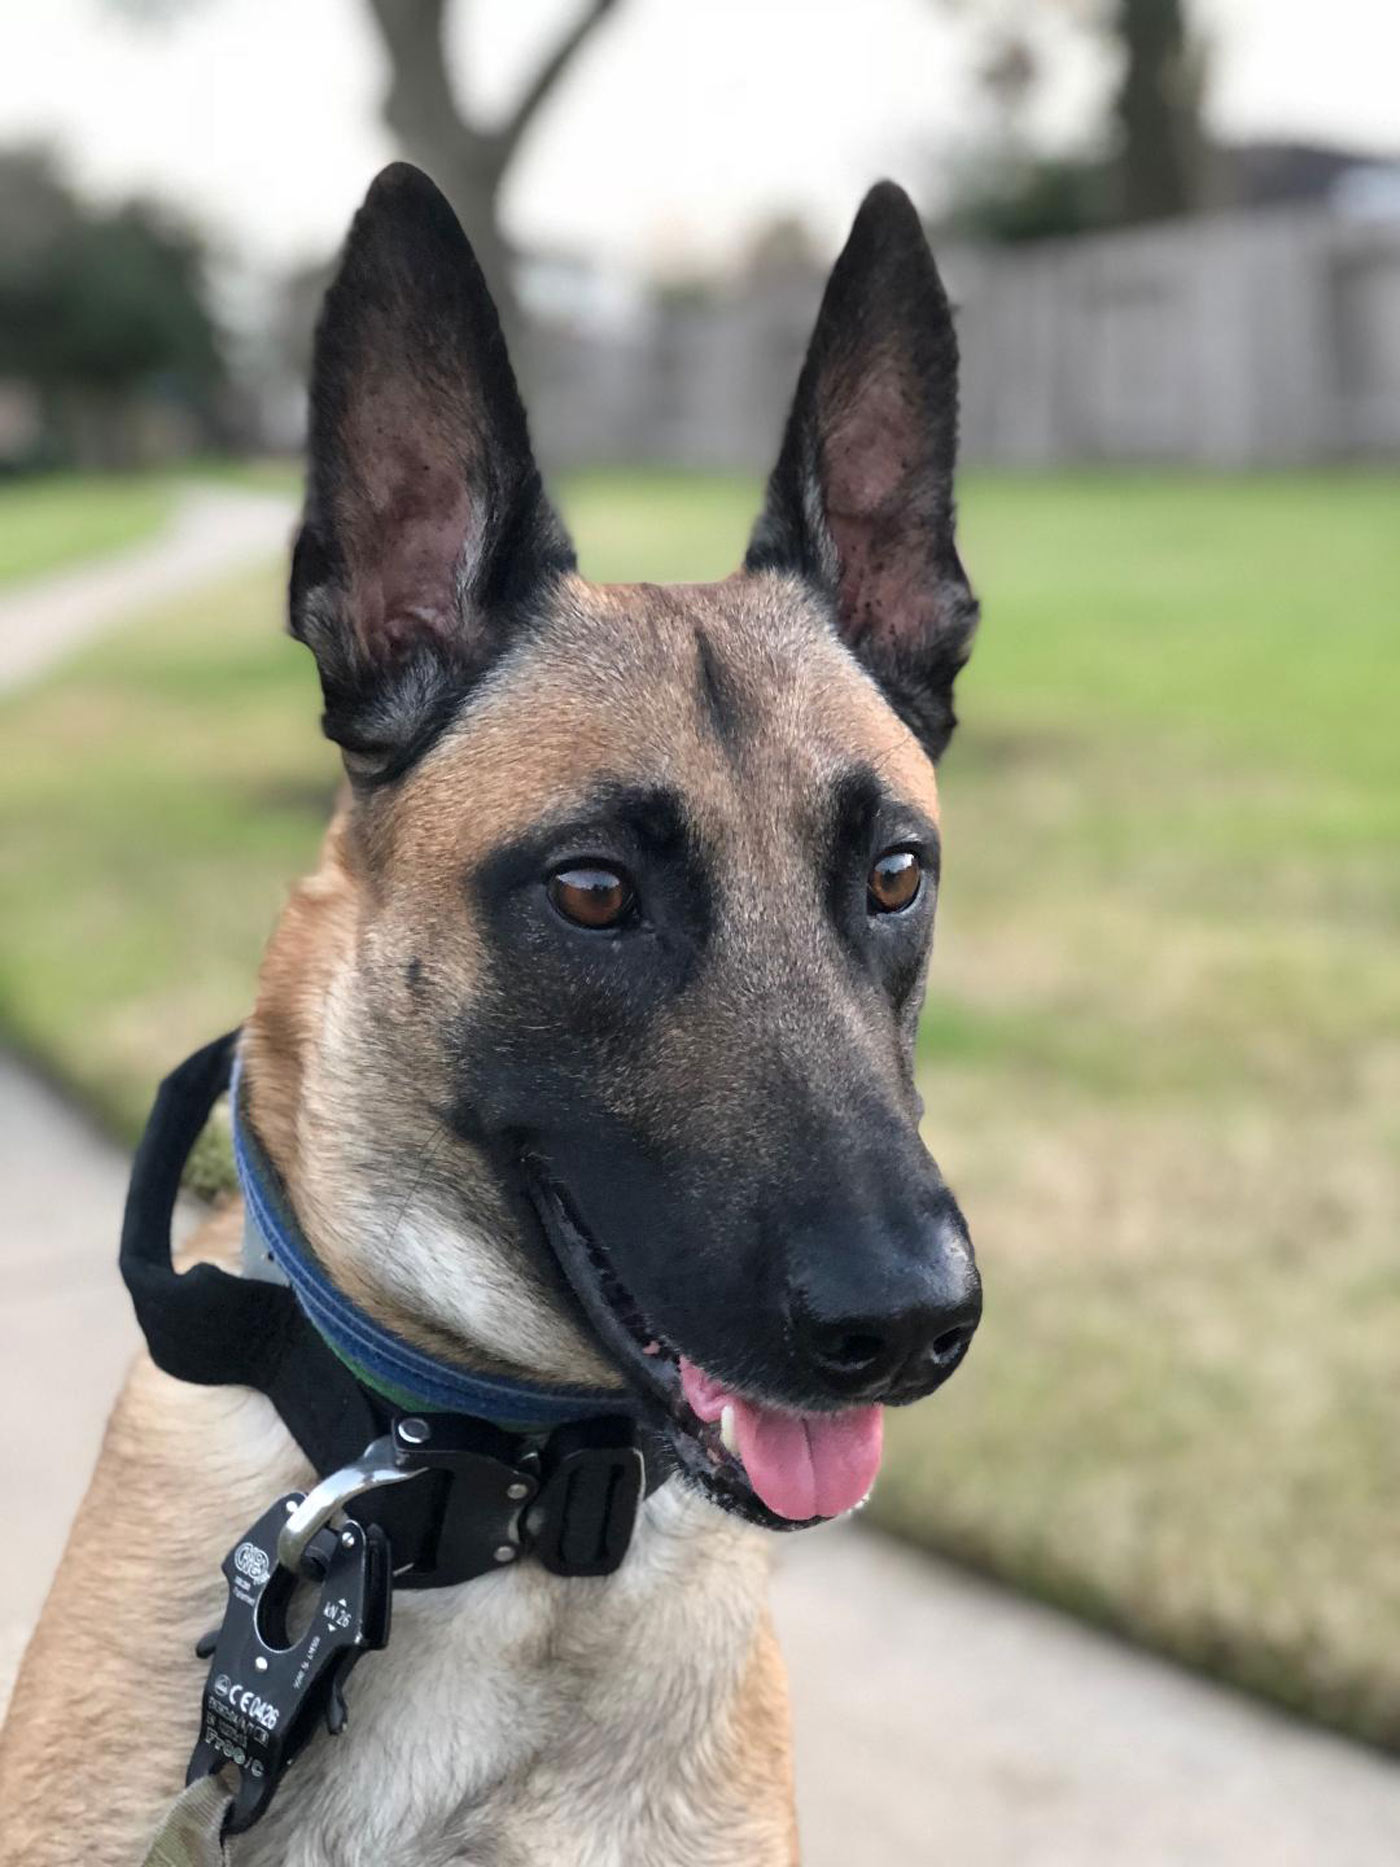 Dear Readers: Meet Audie! He is a Belgian Malinois. A type of highly intelligent shepherd, these dogs are used by the military and by the police.